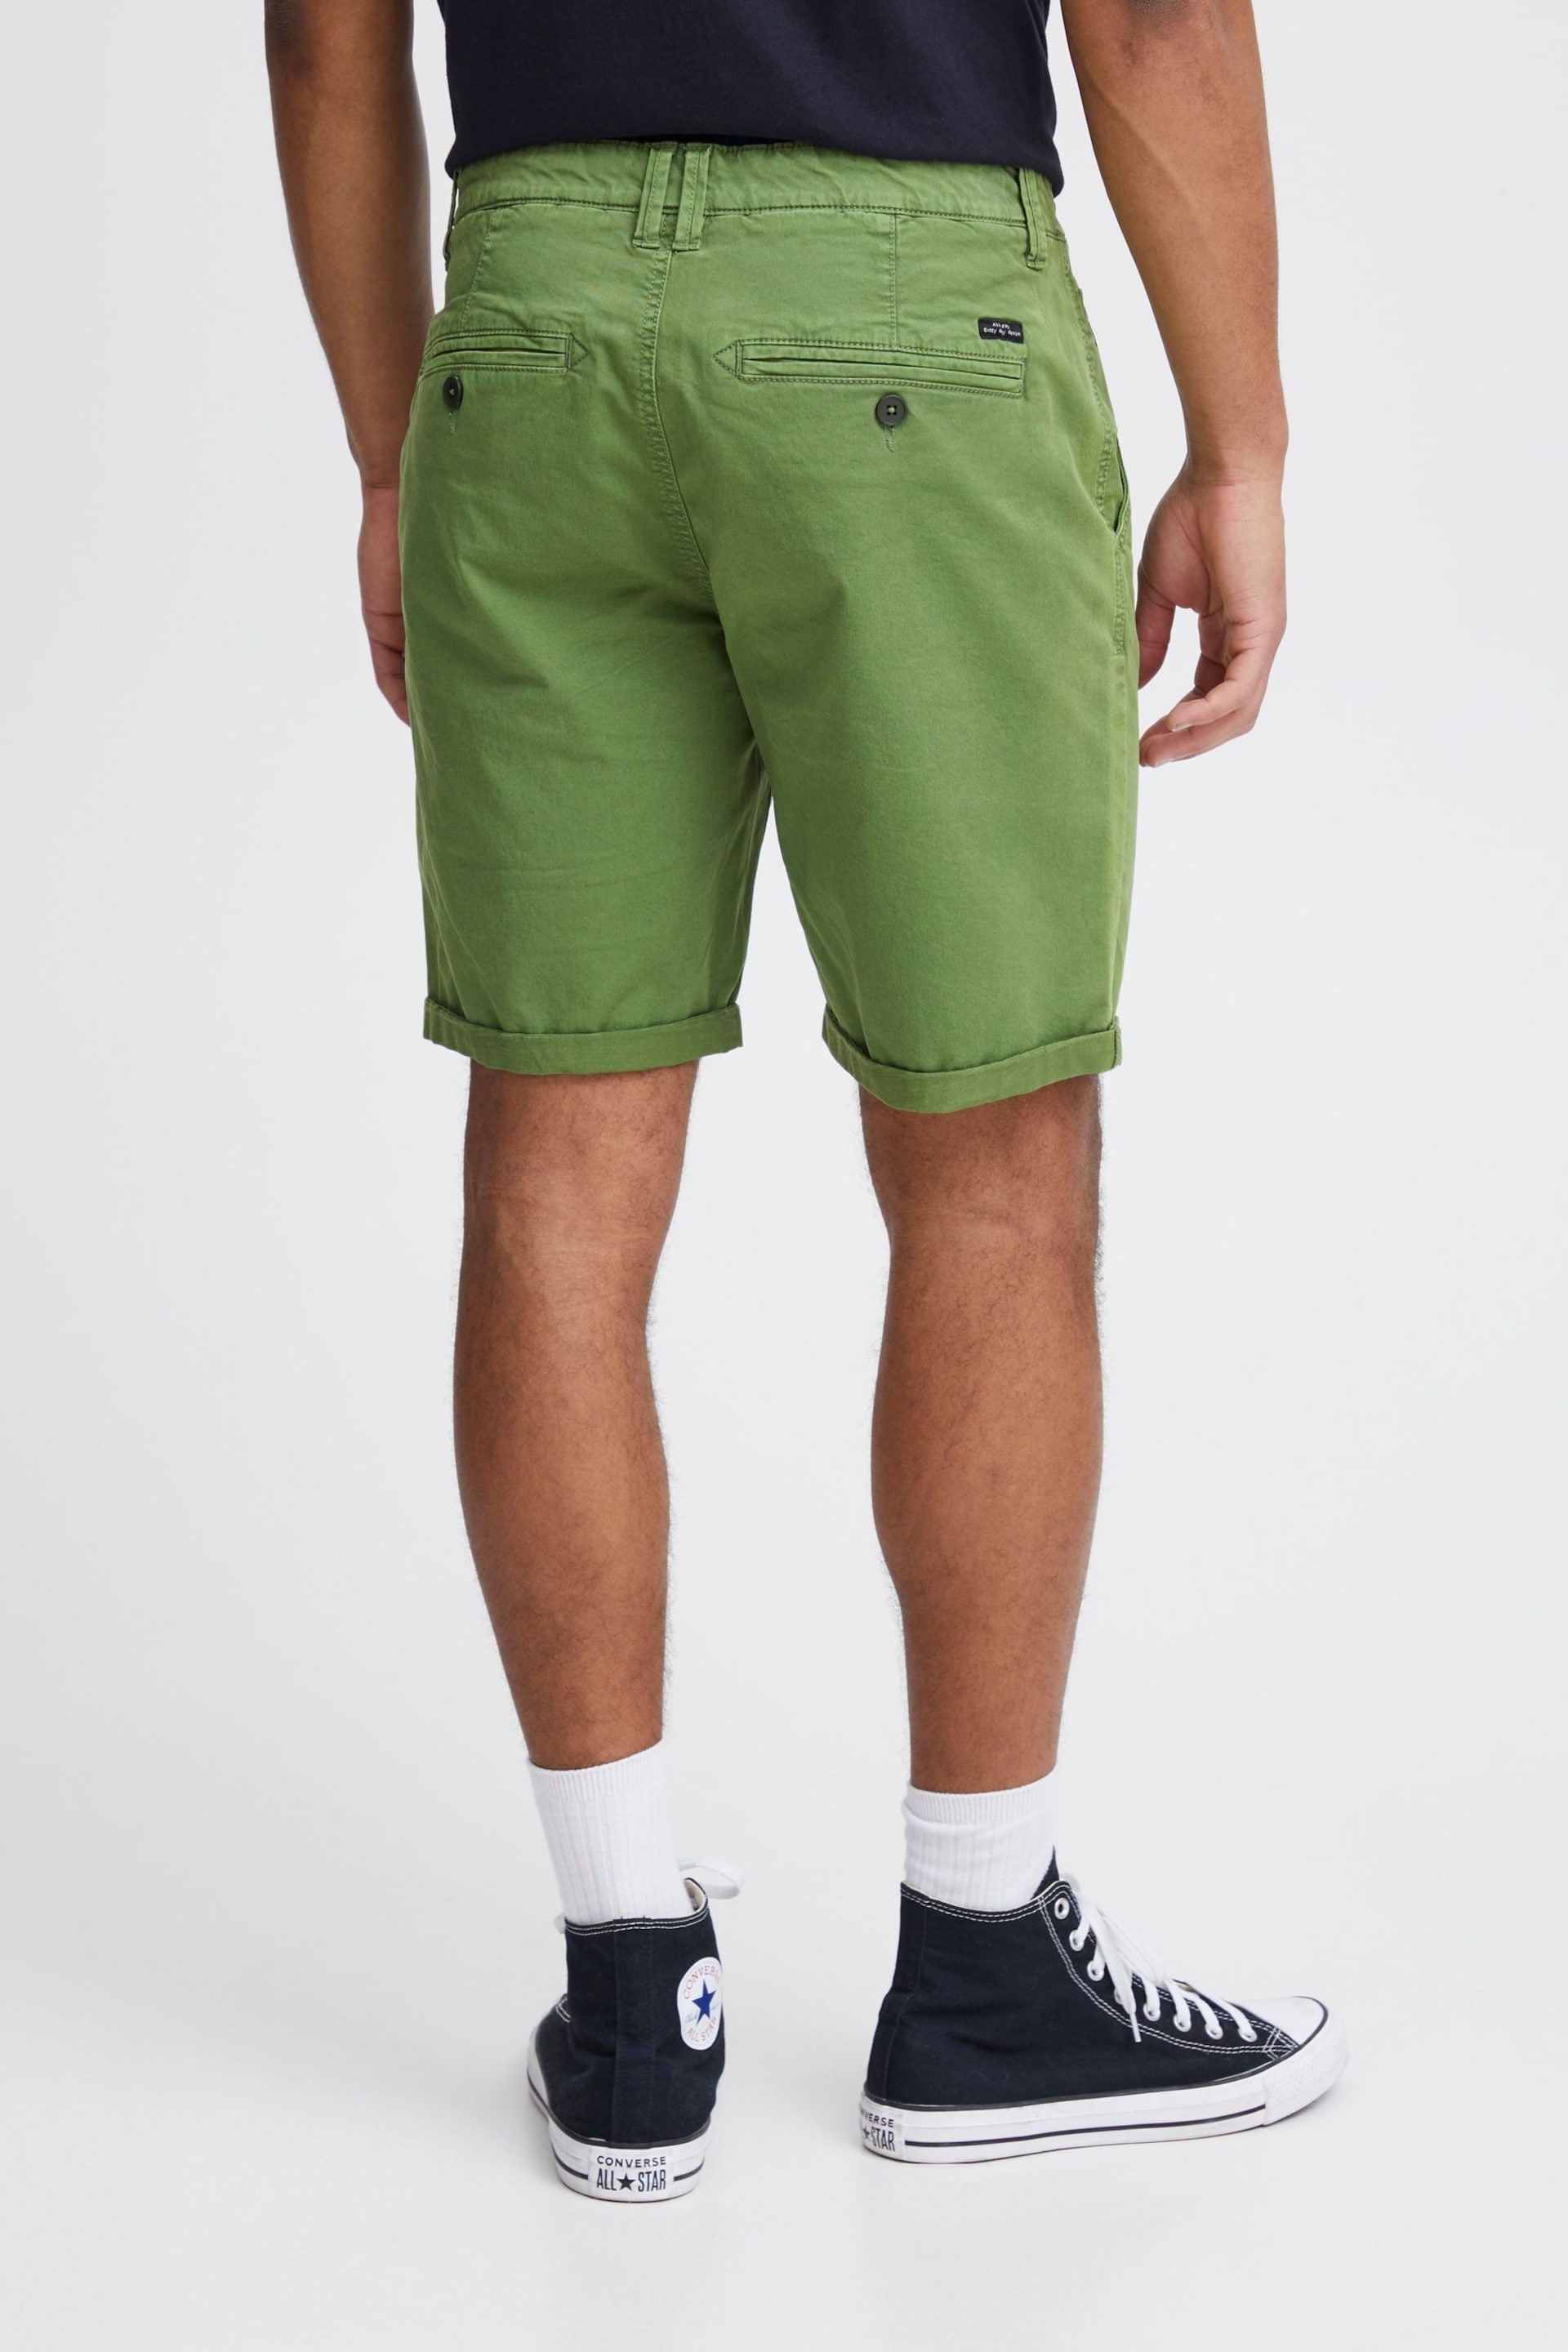 Blend Green Stretch Chino Shorts - Image 2 of 5